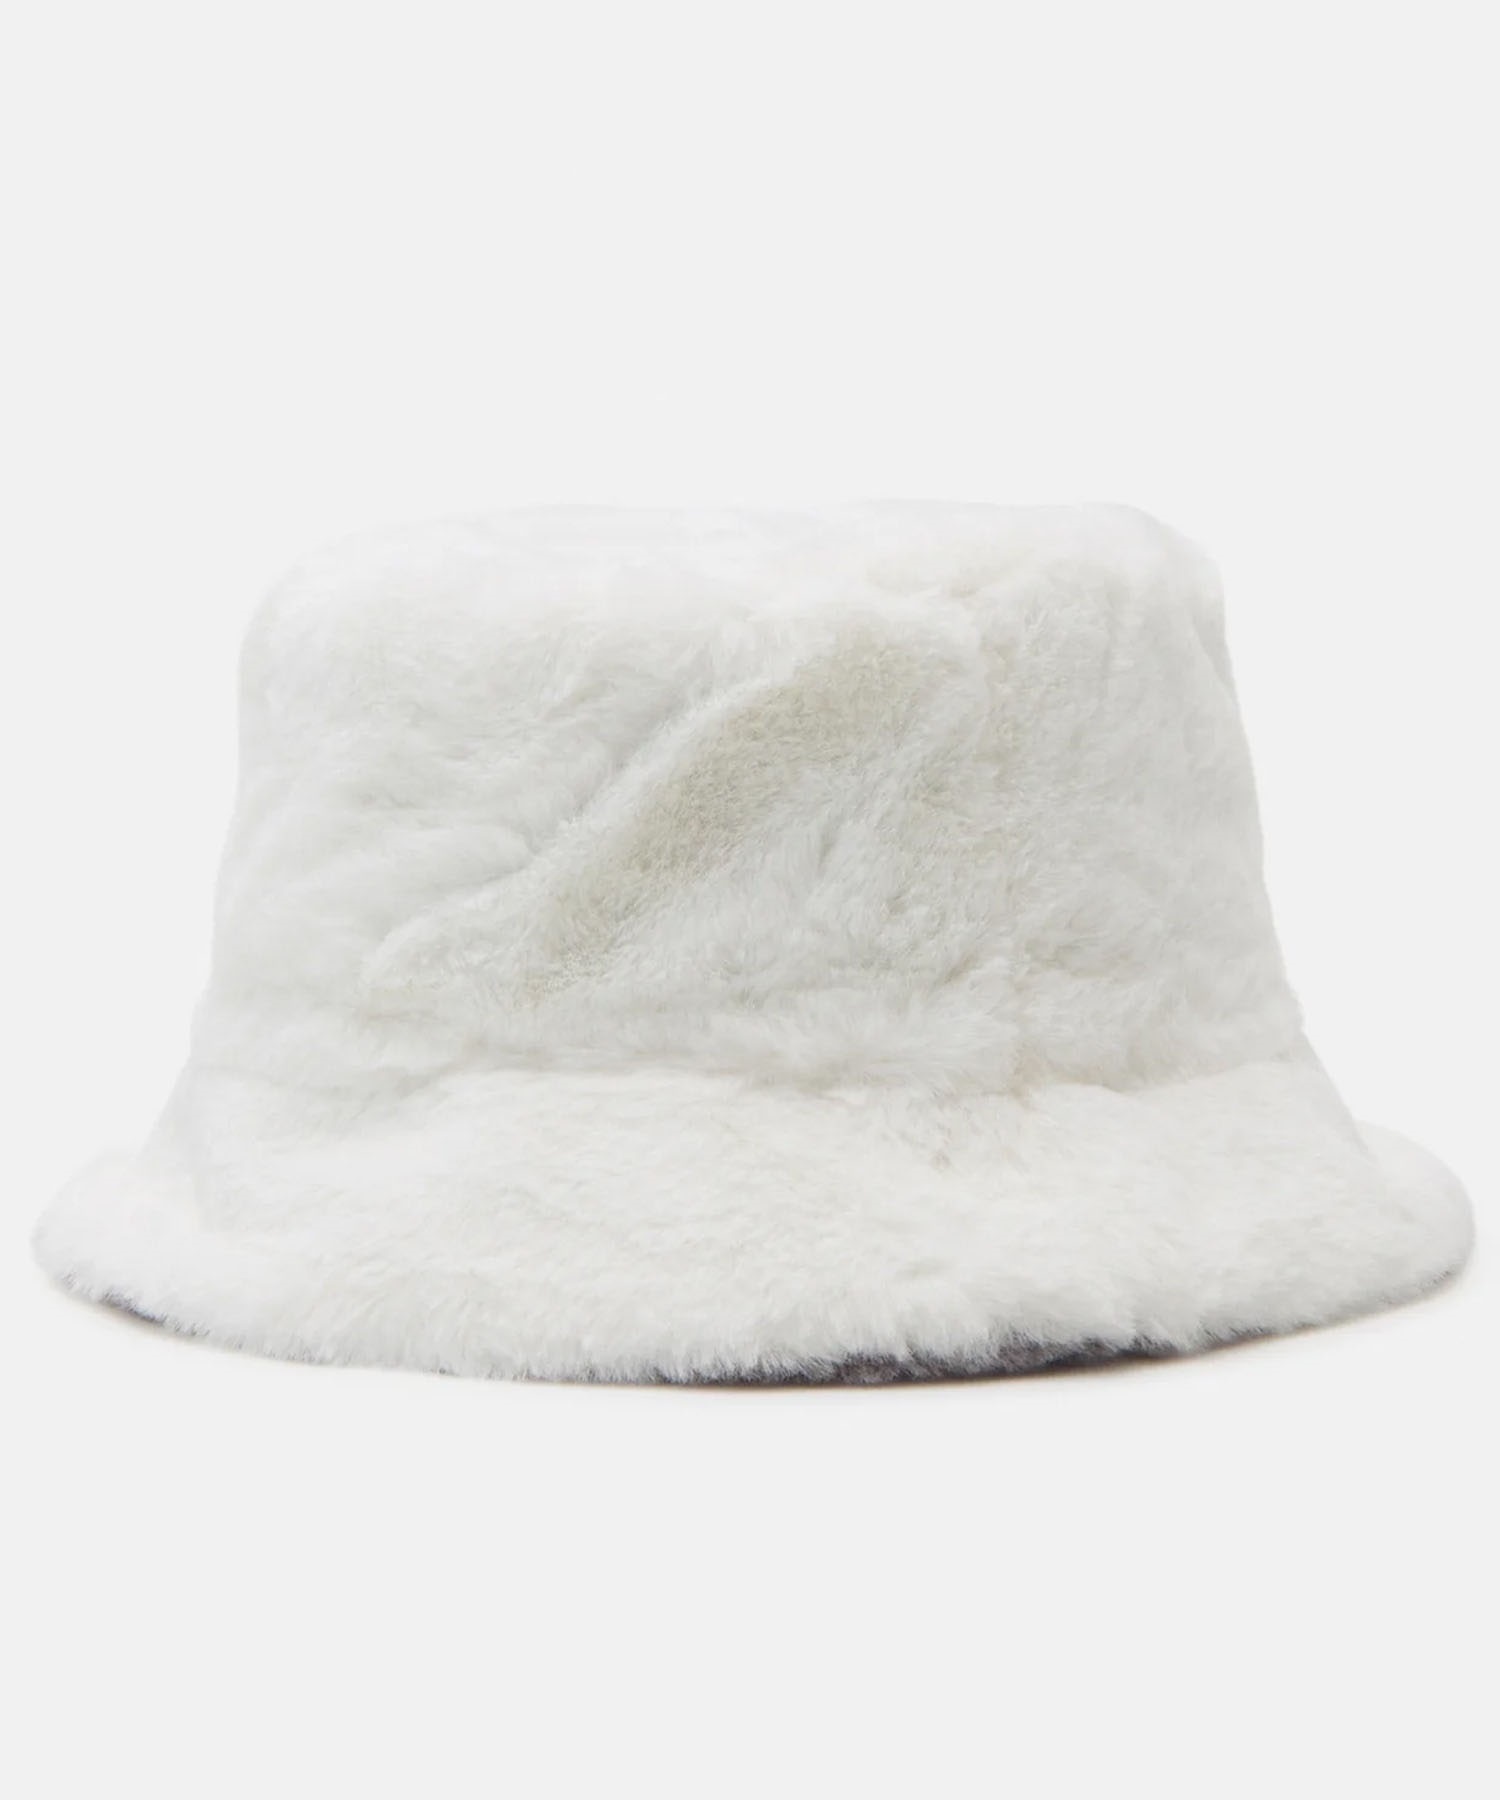 TOMMY JEANS/トミージーンズ バケットハット FUZZY REV. BUCKET ファジーリバーシブル フェイク ファー AW15459(BK/WT-FREE)